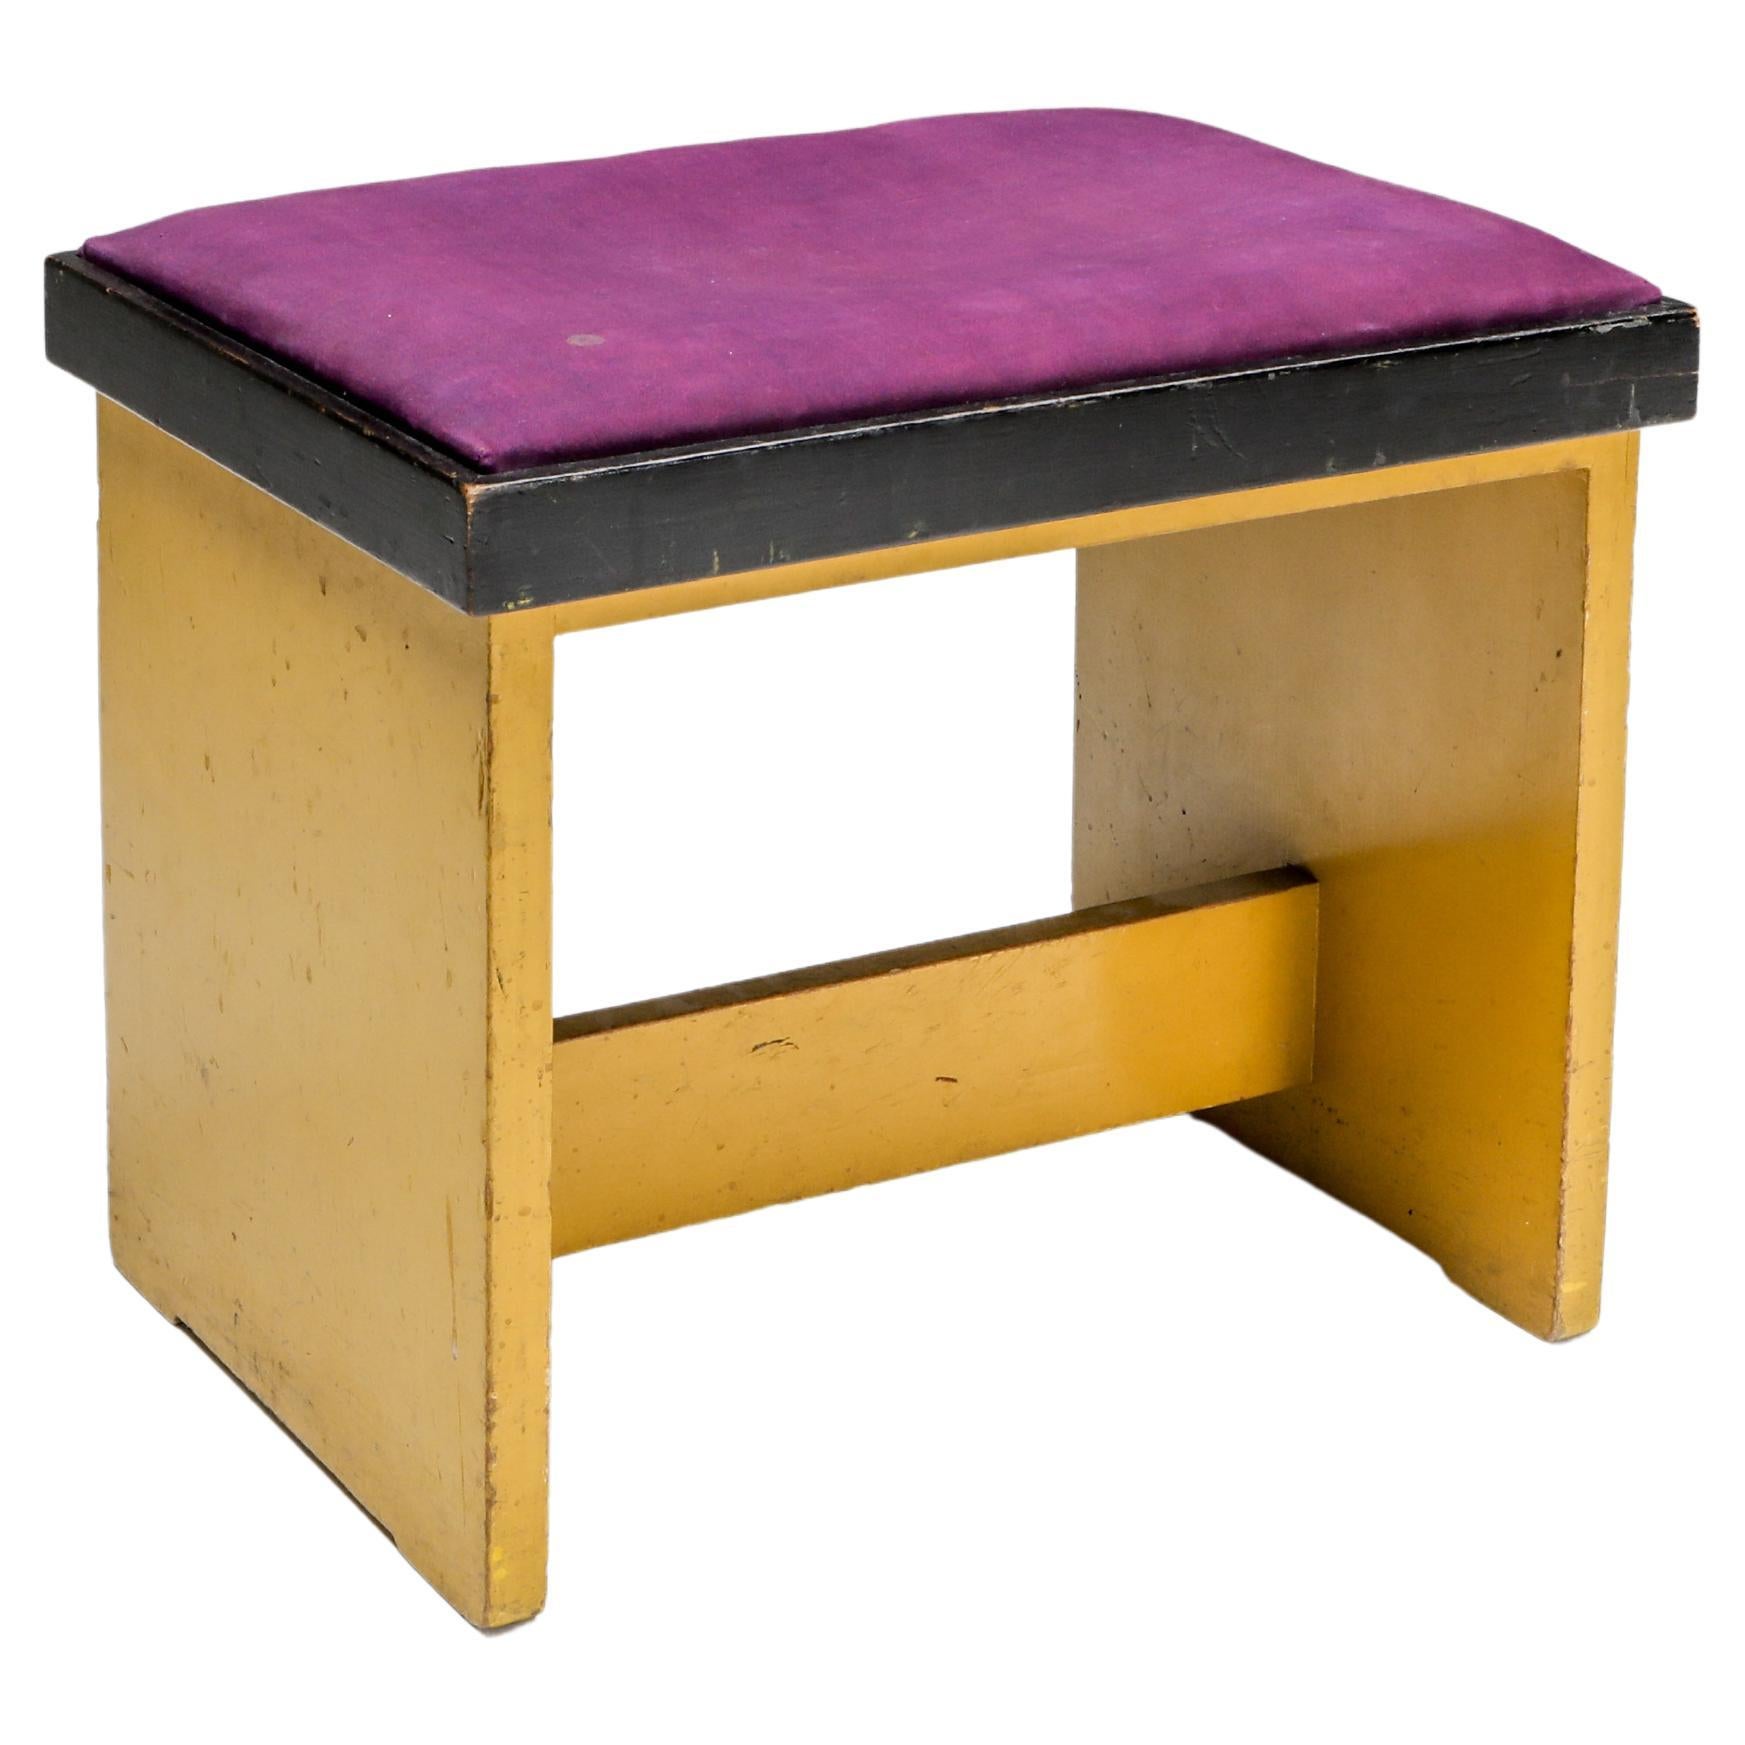 Modernist Stool by H. Wouda, 1924